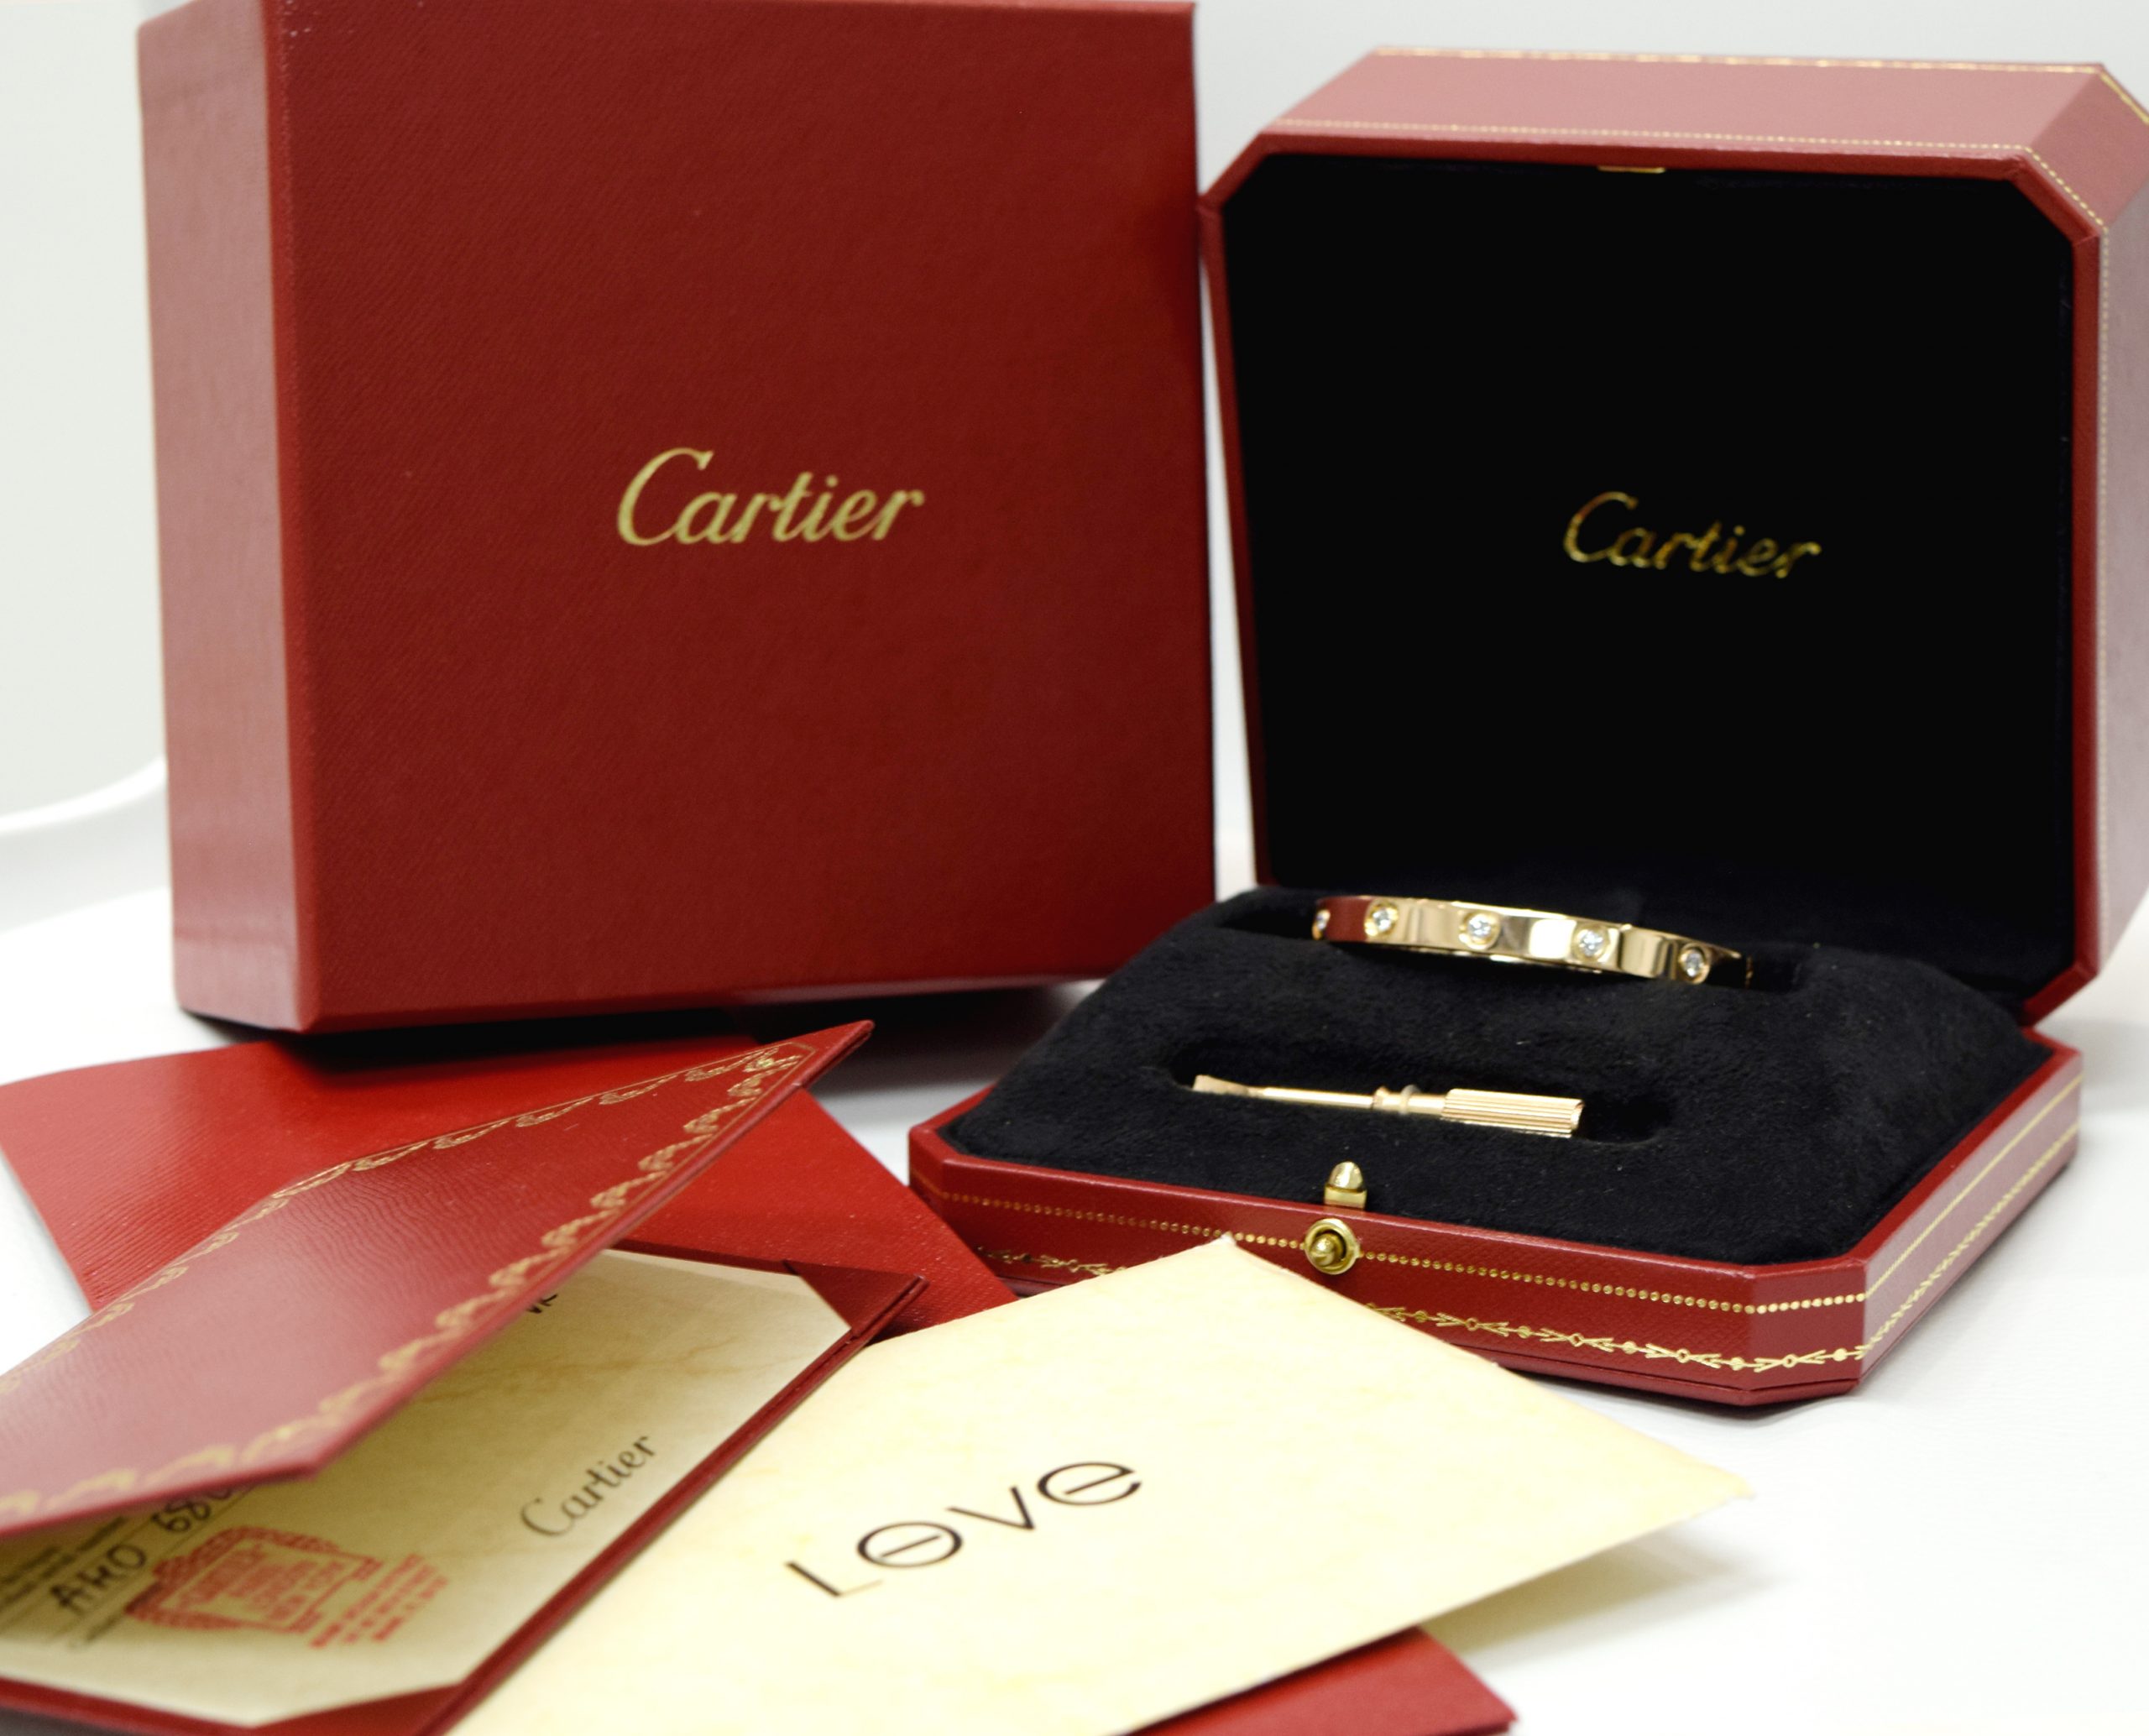 Kylie Jenner's Cartier Love bracelet is the most searched-for jewelry item  on Google